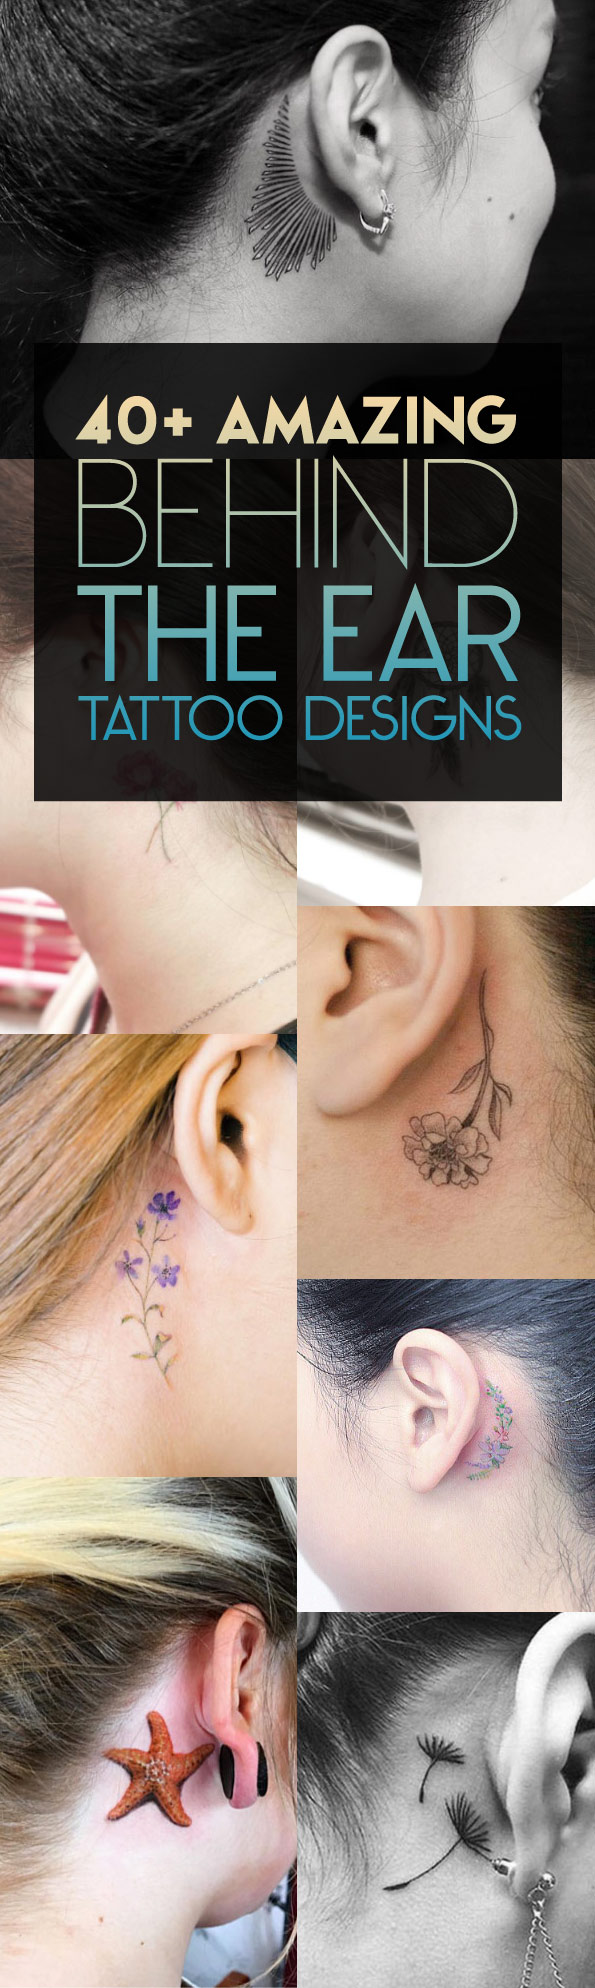 40+ Amazing Behind The Ear Tattoo Designs